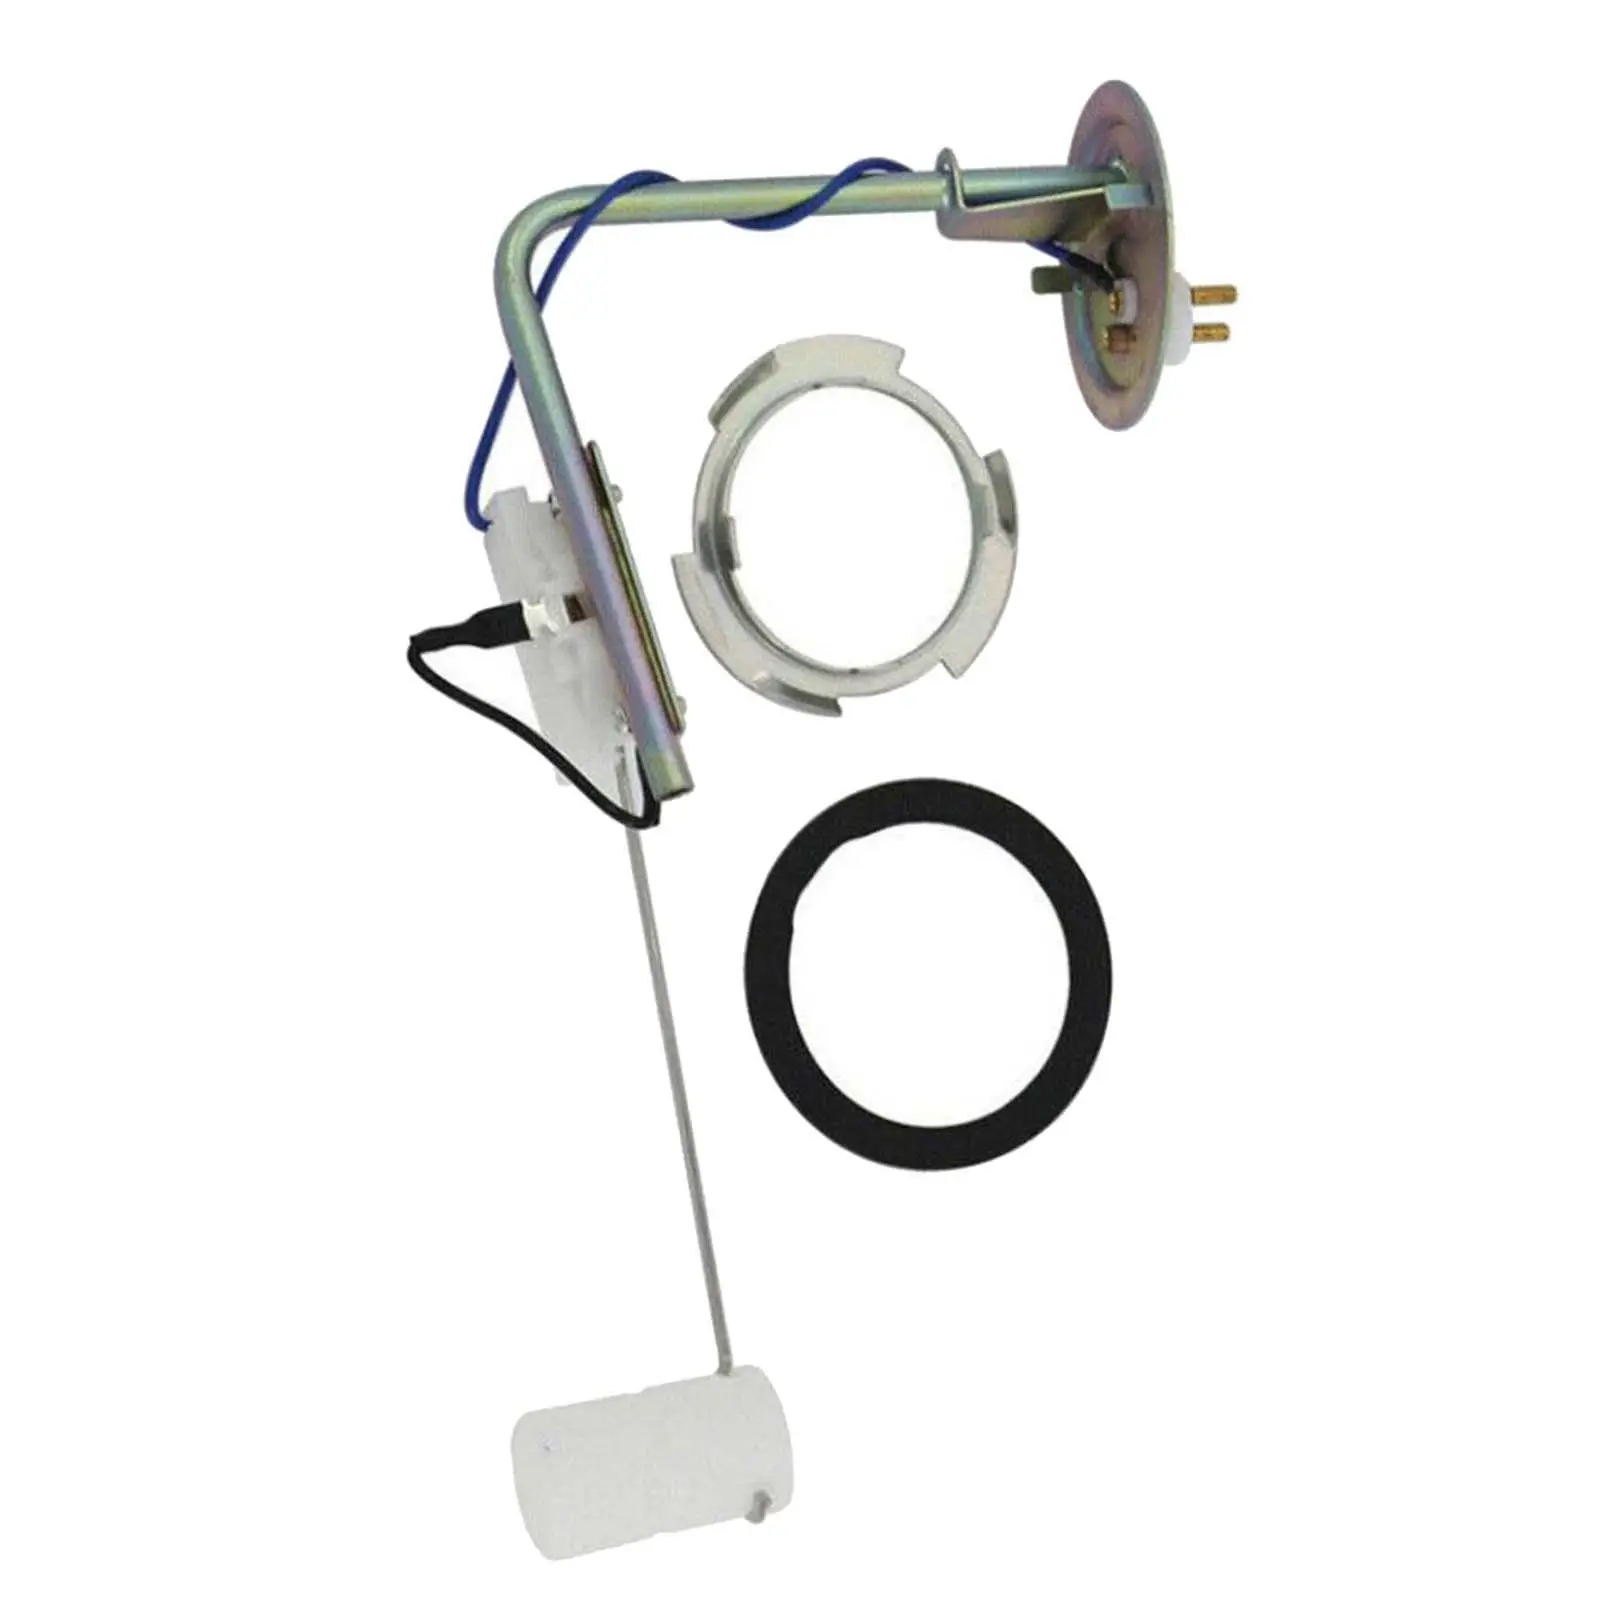 Fuel Pump Sender Spare Parts Replacement Assembly for Lincoln Mercury